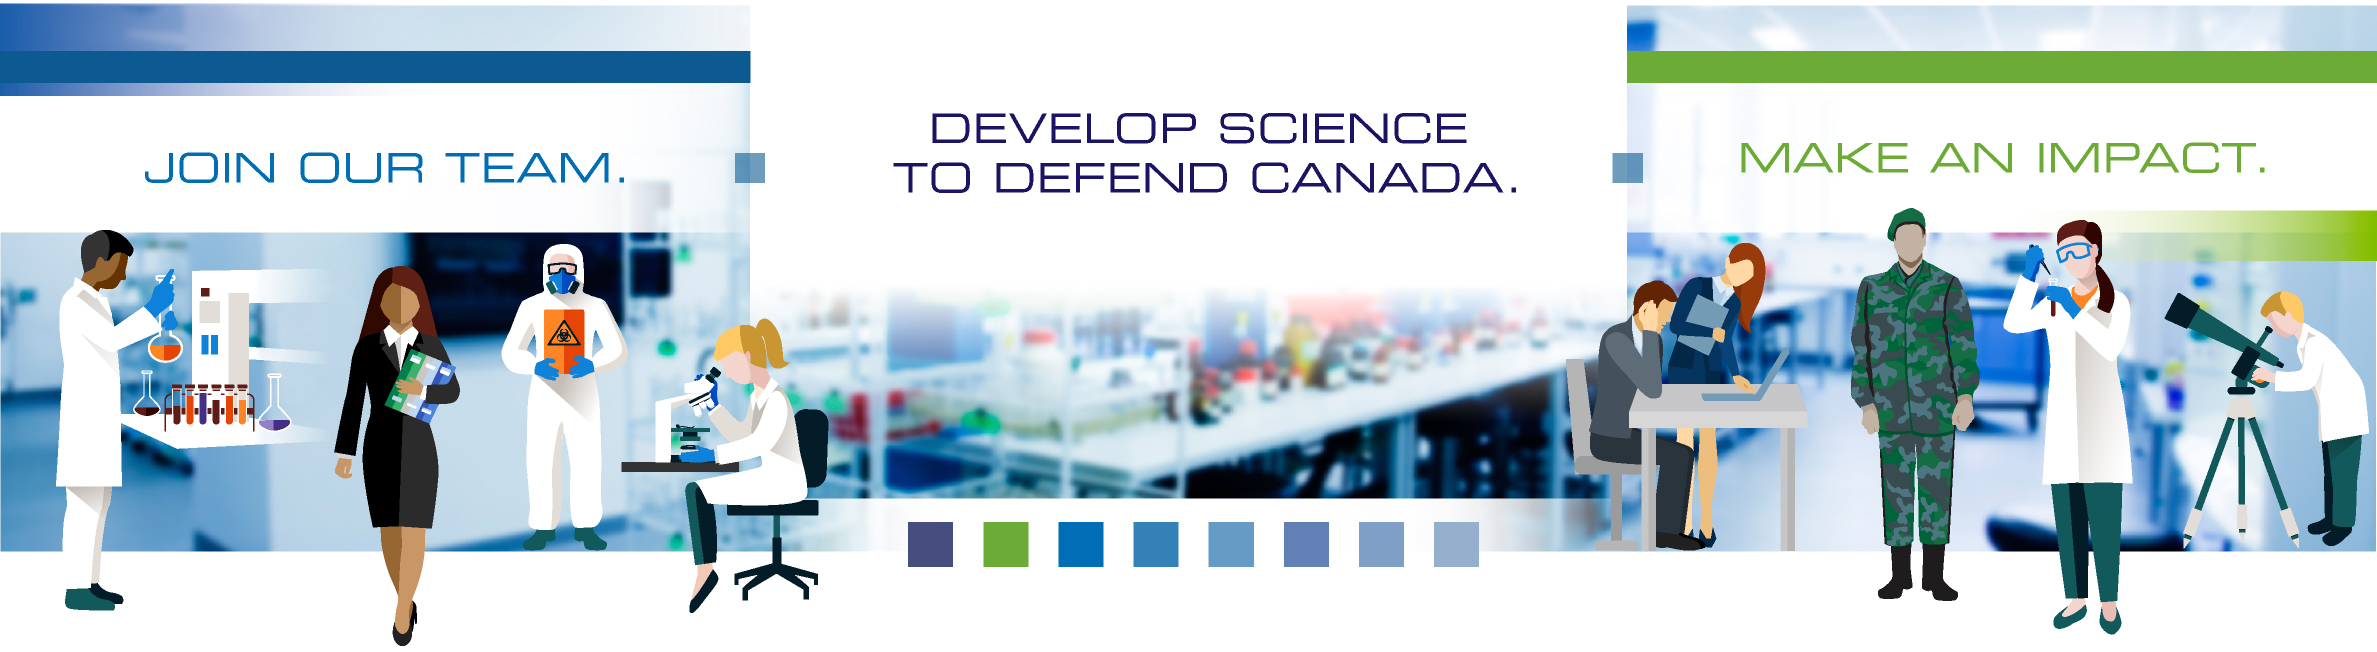 Banner: Join our team, develop science to defend Canada, make an impact